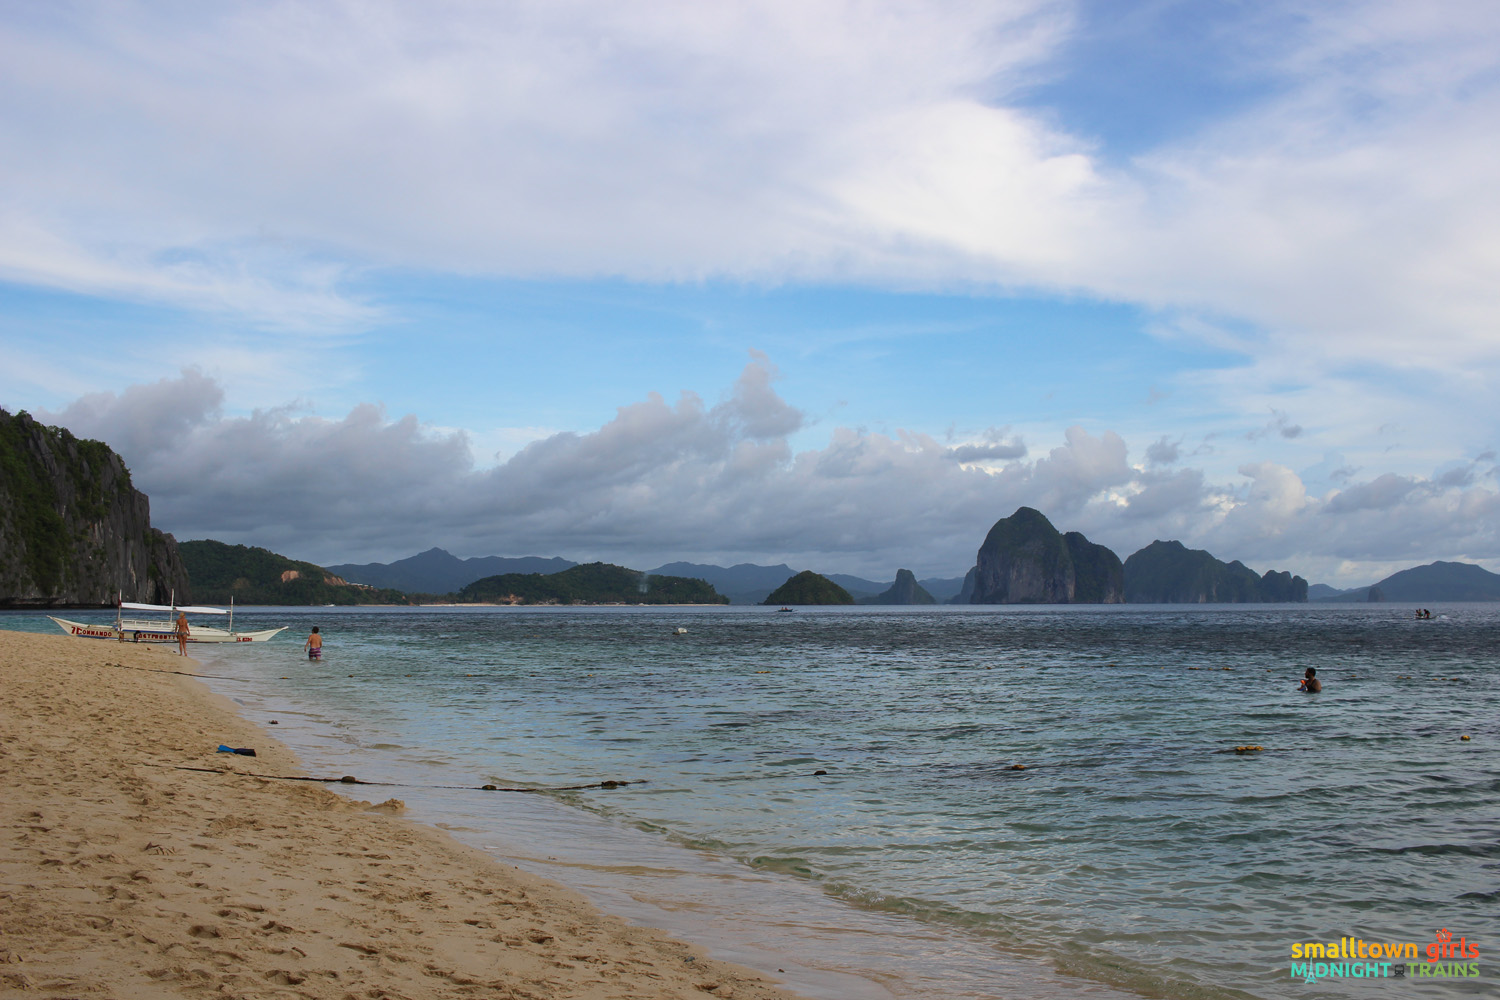 El Nido paradise combo tour A and C -- Seven Commando Beach has fine white sand and the most stunning views